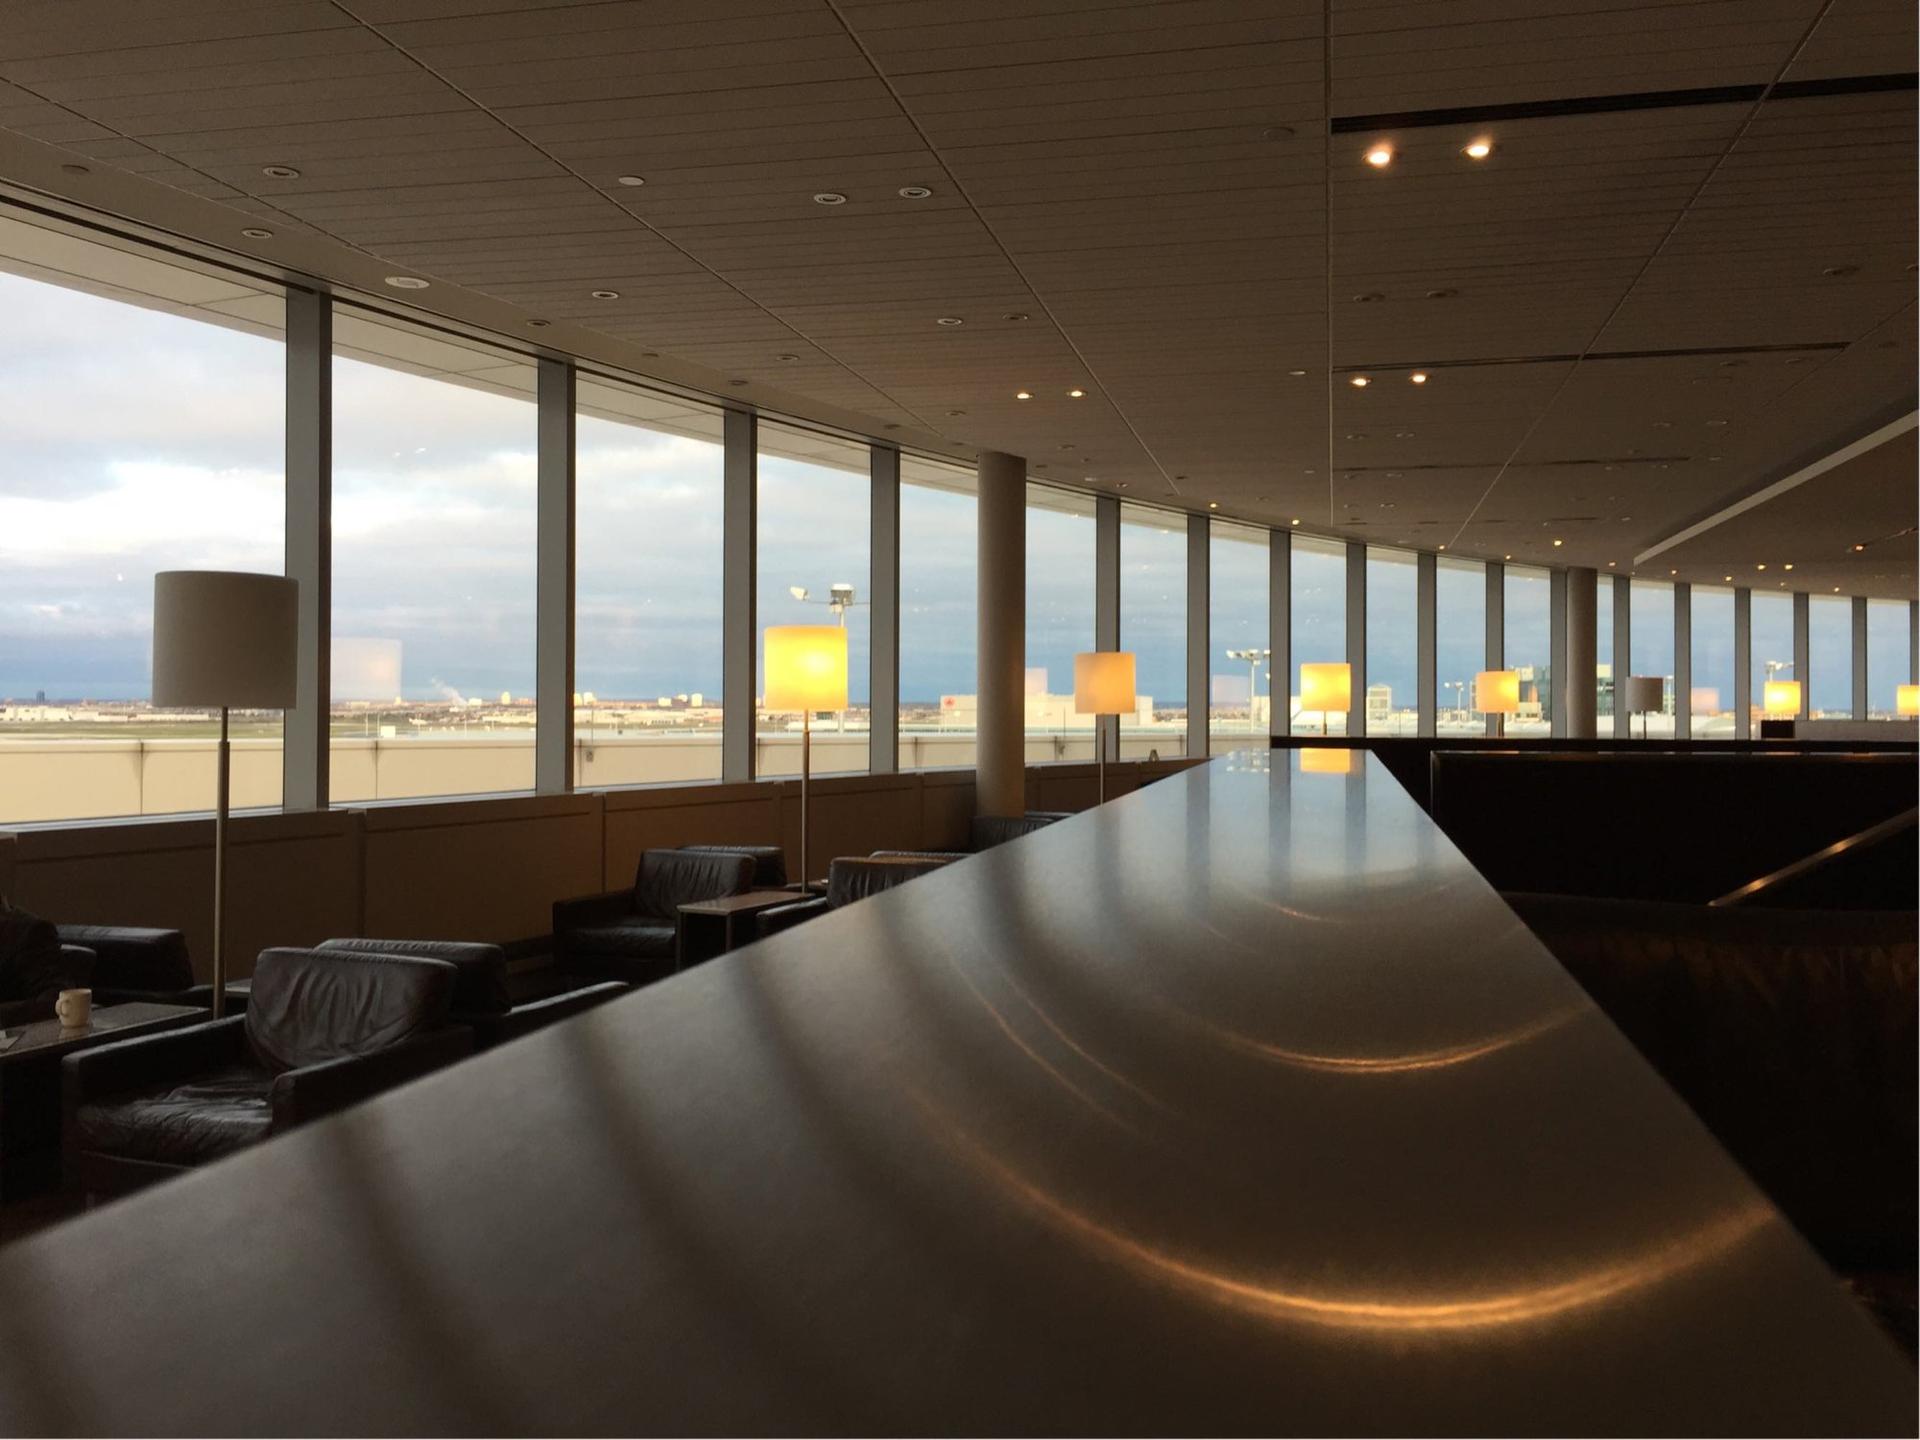 Air Canada Maple Leaf Lounge image 20 of 21